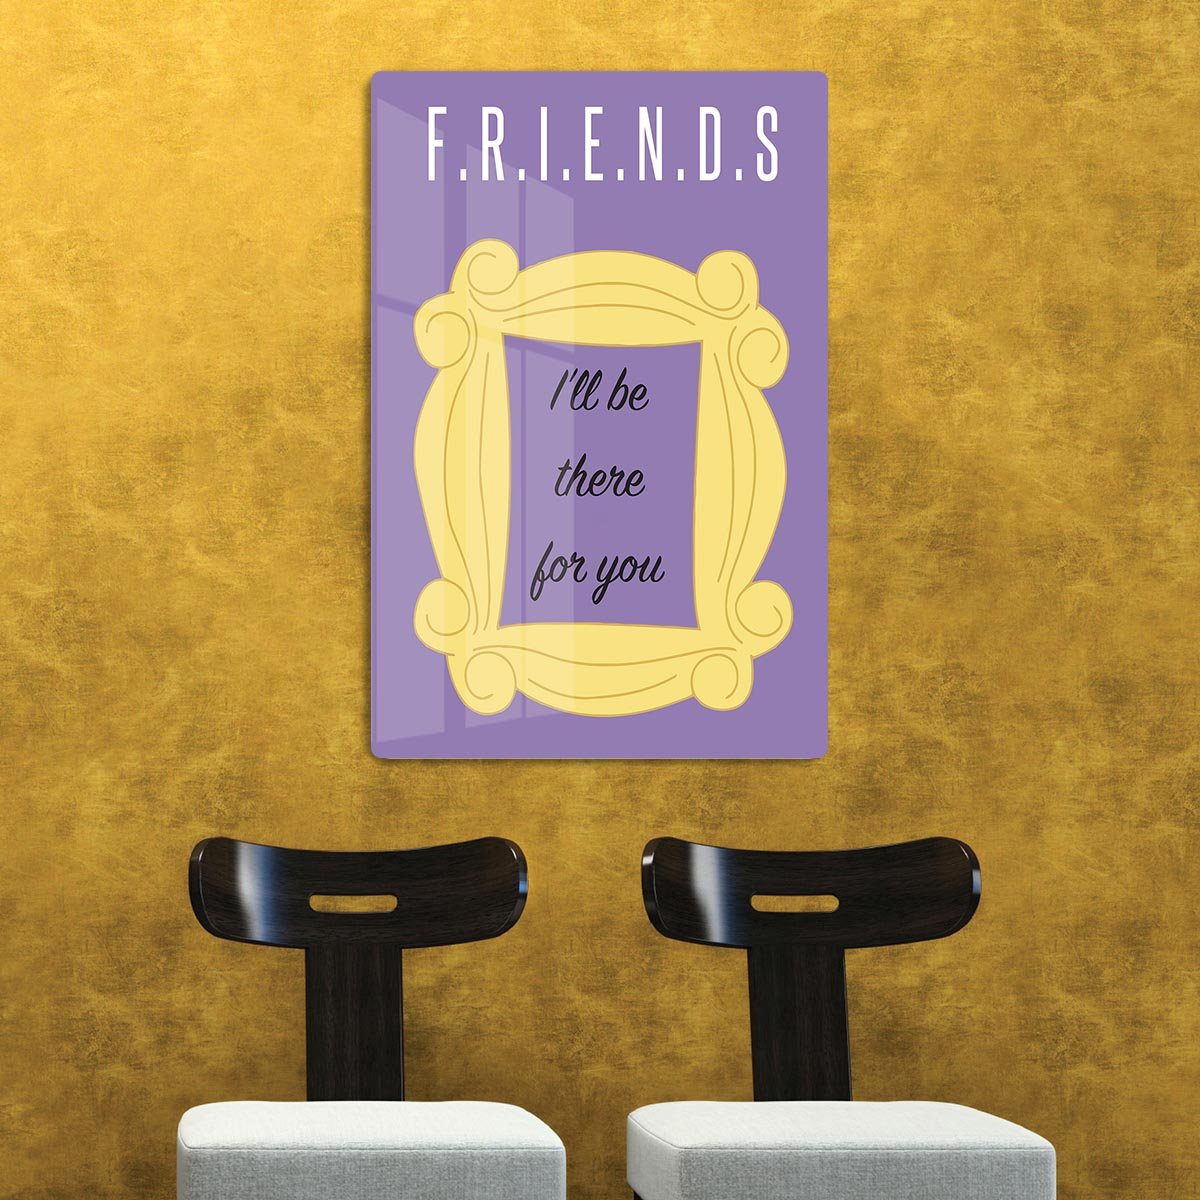 Friends Ill Be There For You Minimal Movie HD Metal Print